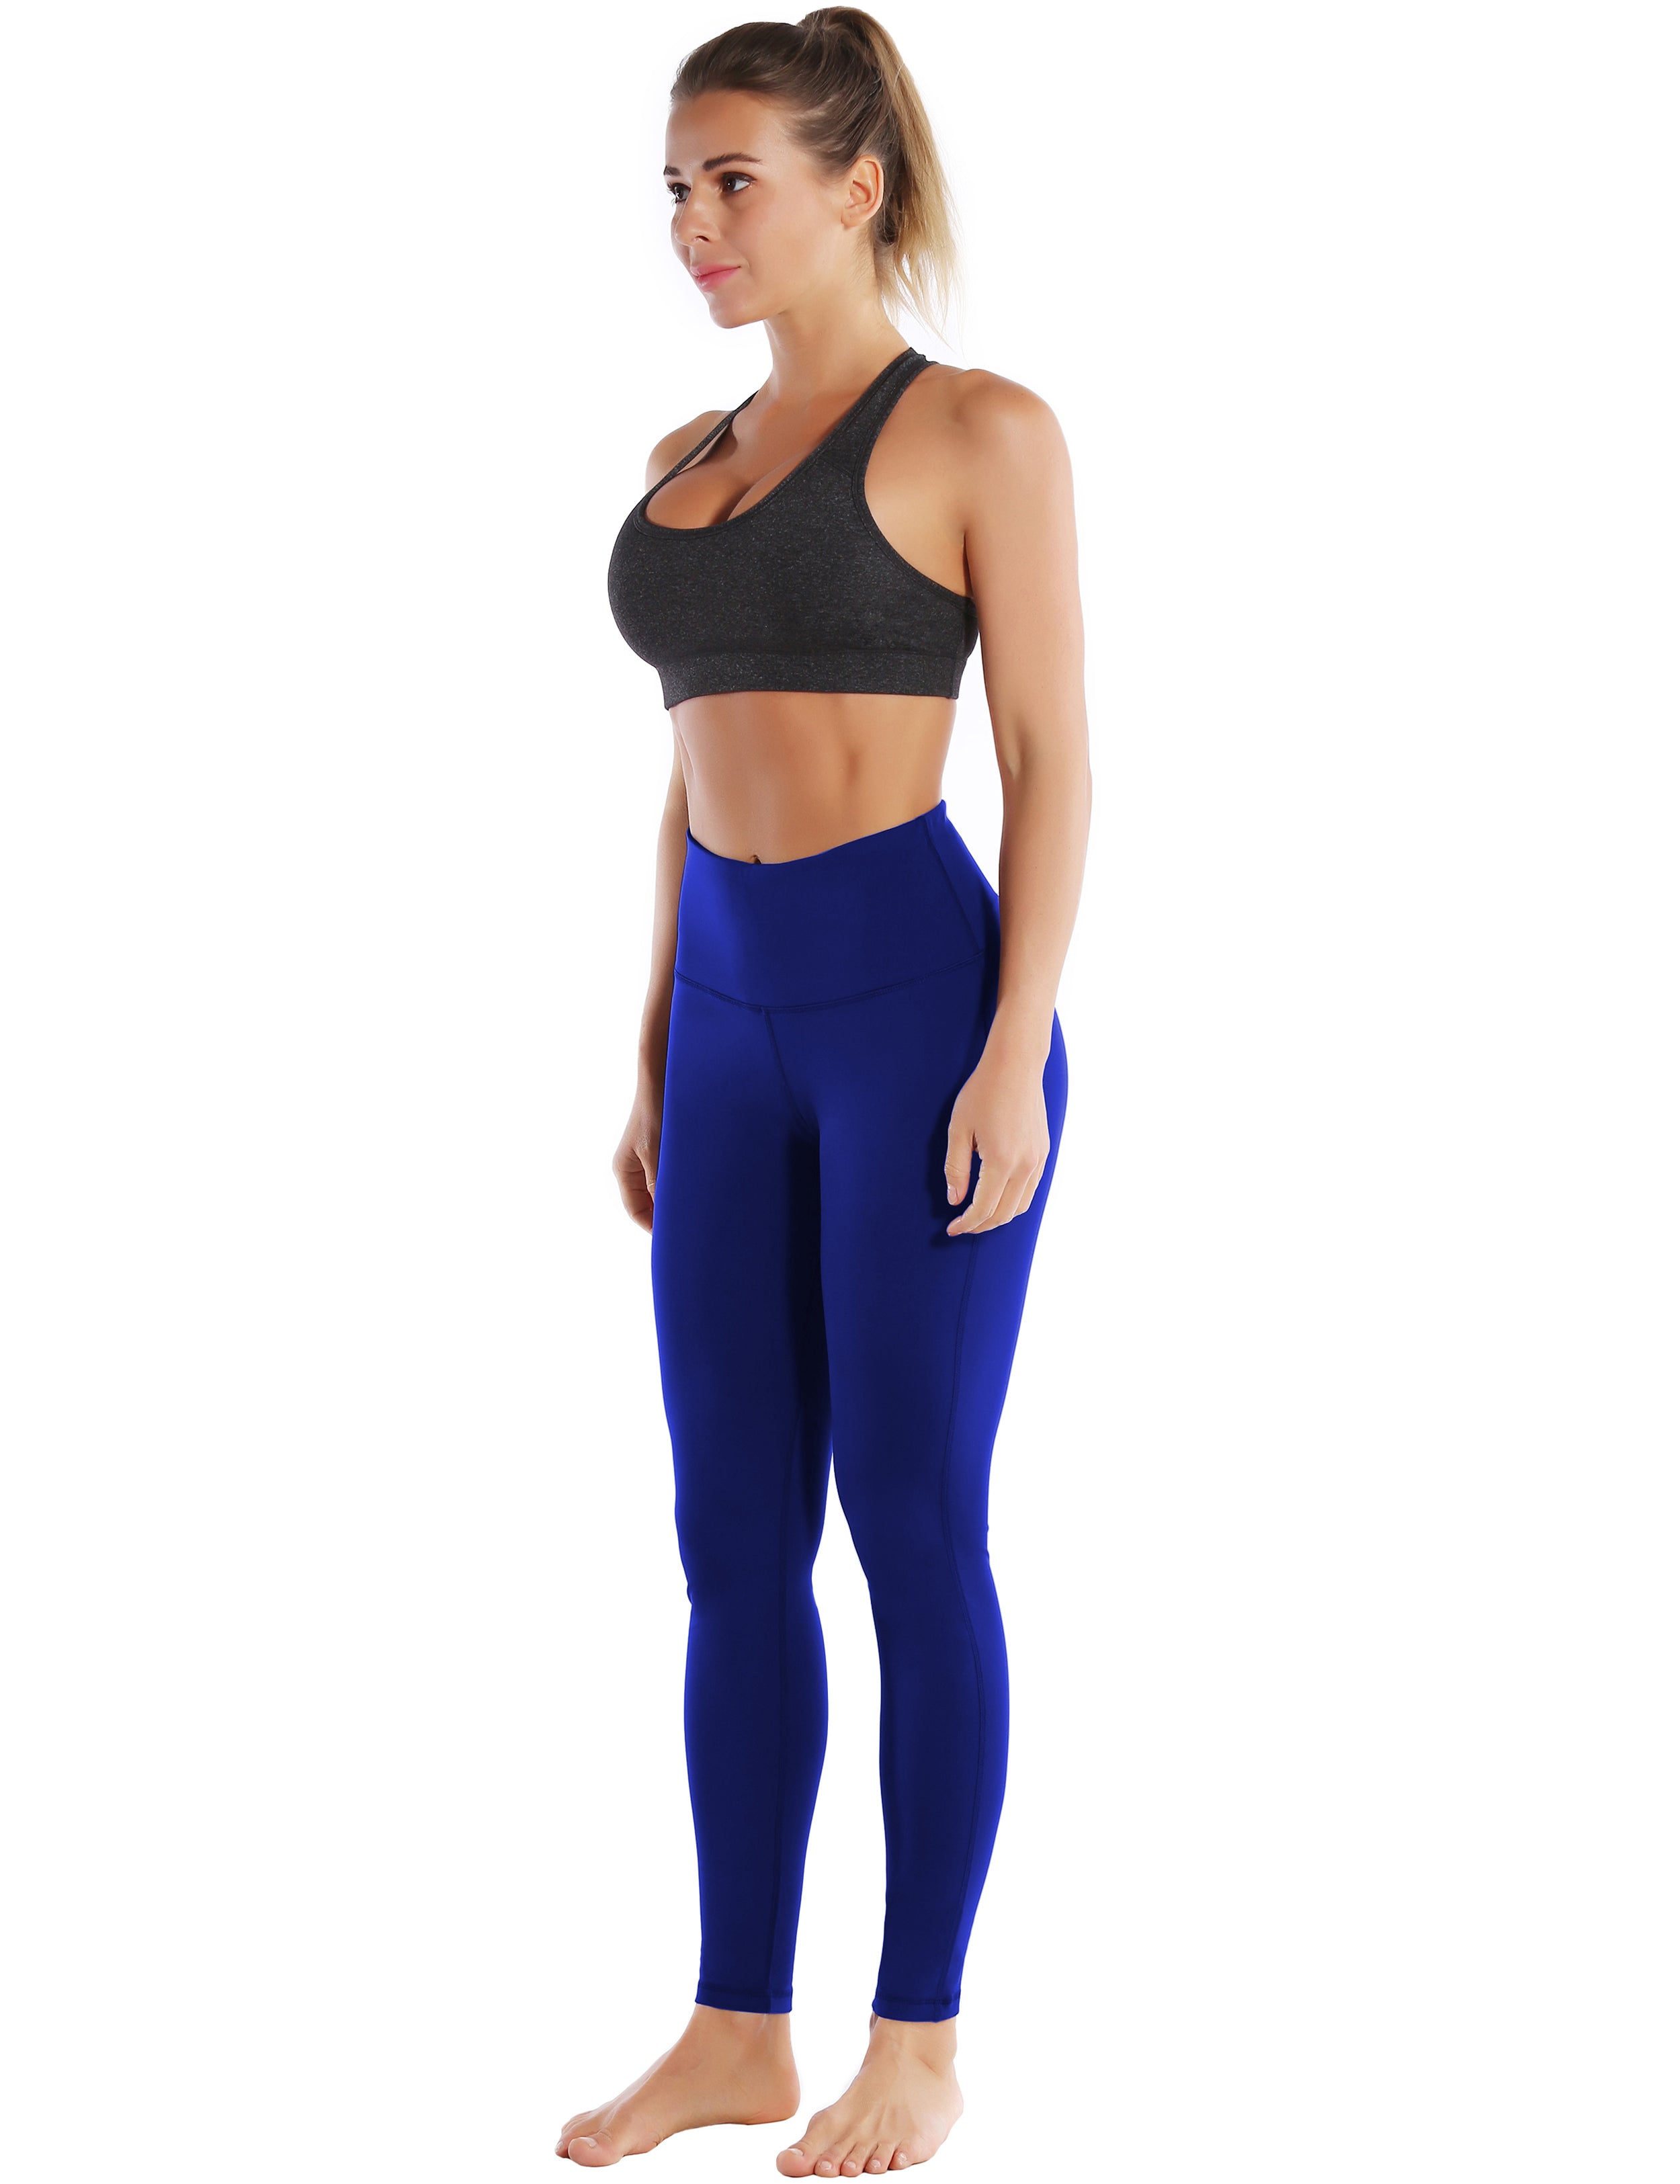 High Waist Side Line Yoga Pants navy Side Line is Make Your Legs Look Longer and Thinner 75%Nylon/25%Spandex Fabric doesn't attract lint easily 4-way stretch No see-through Moisture-wicking Tummy control Inner pocket Two lengths